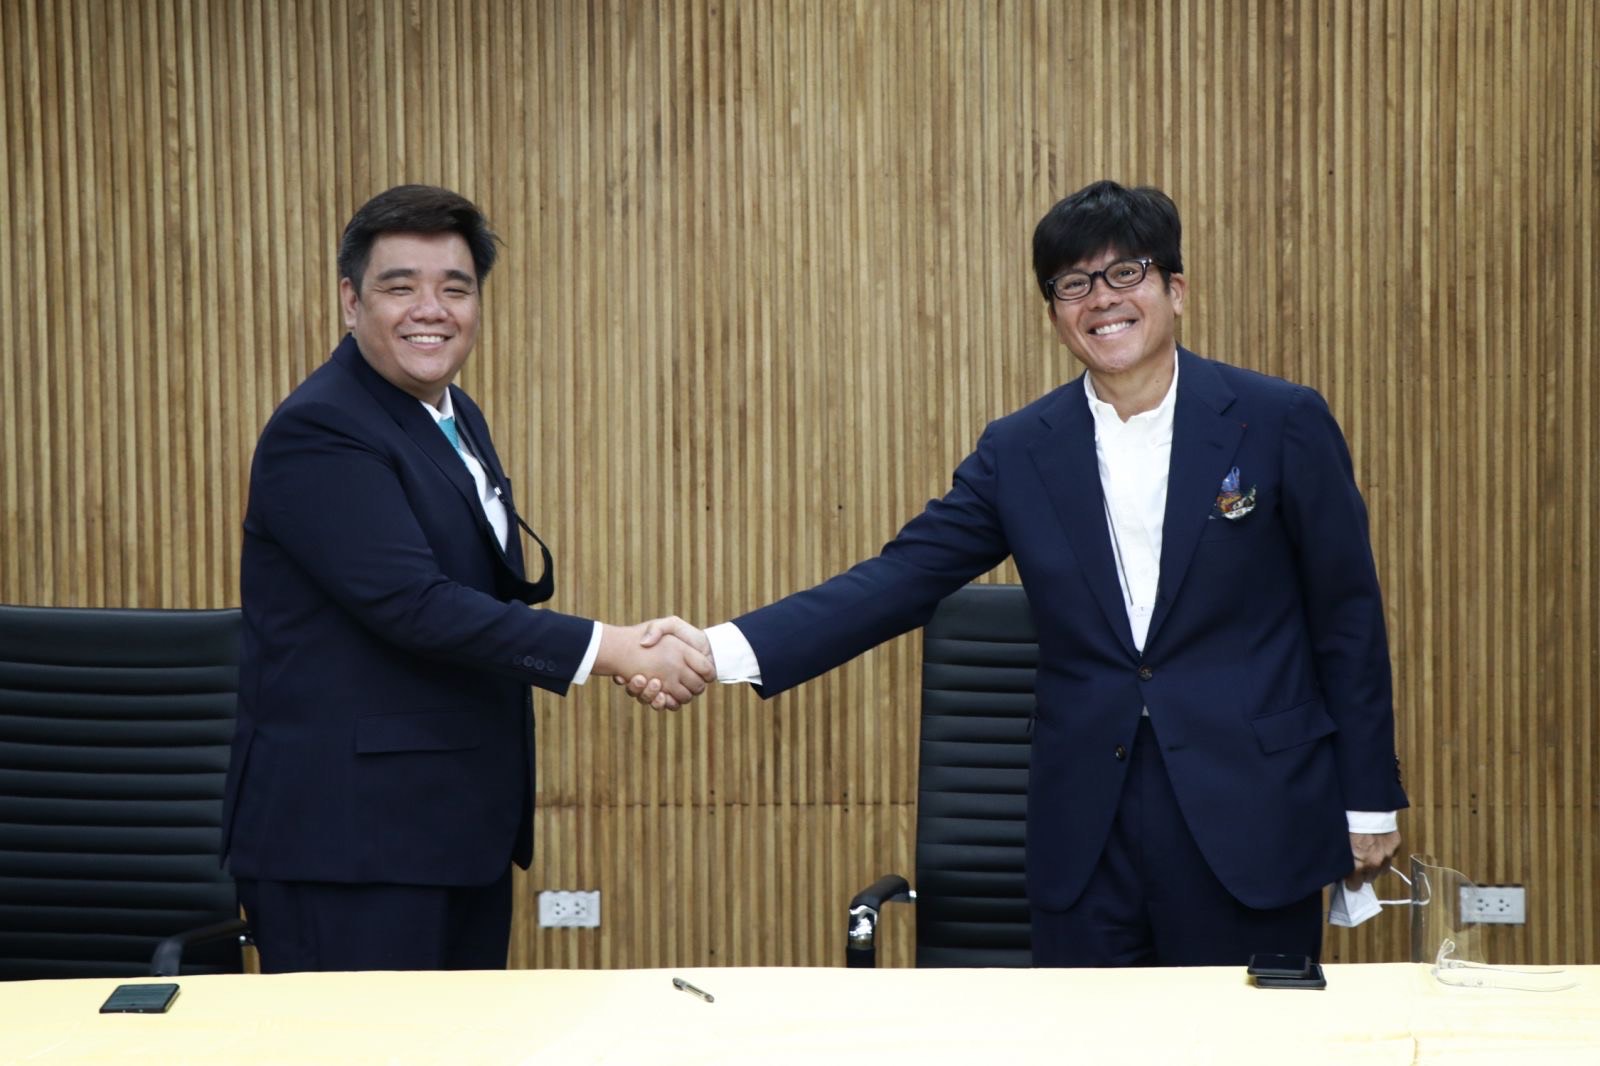 Steve Sy, the CEO of Great Deals, and William Chiongban, CEO of Fast Group, sign the contract for the companies' strategic partnership